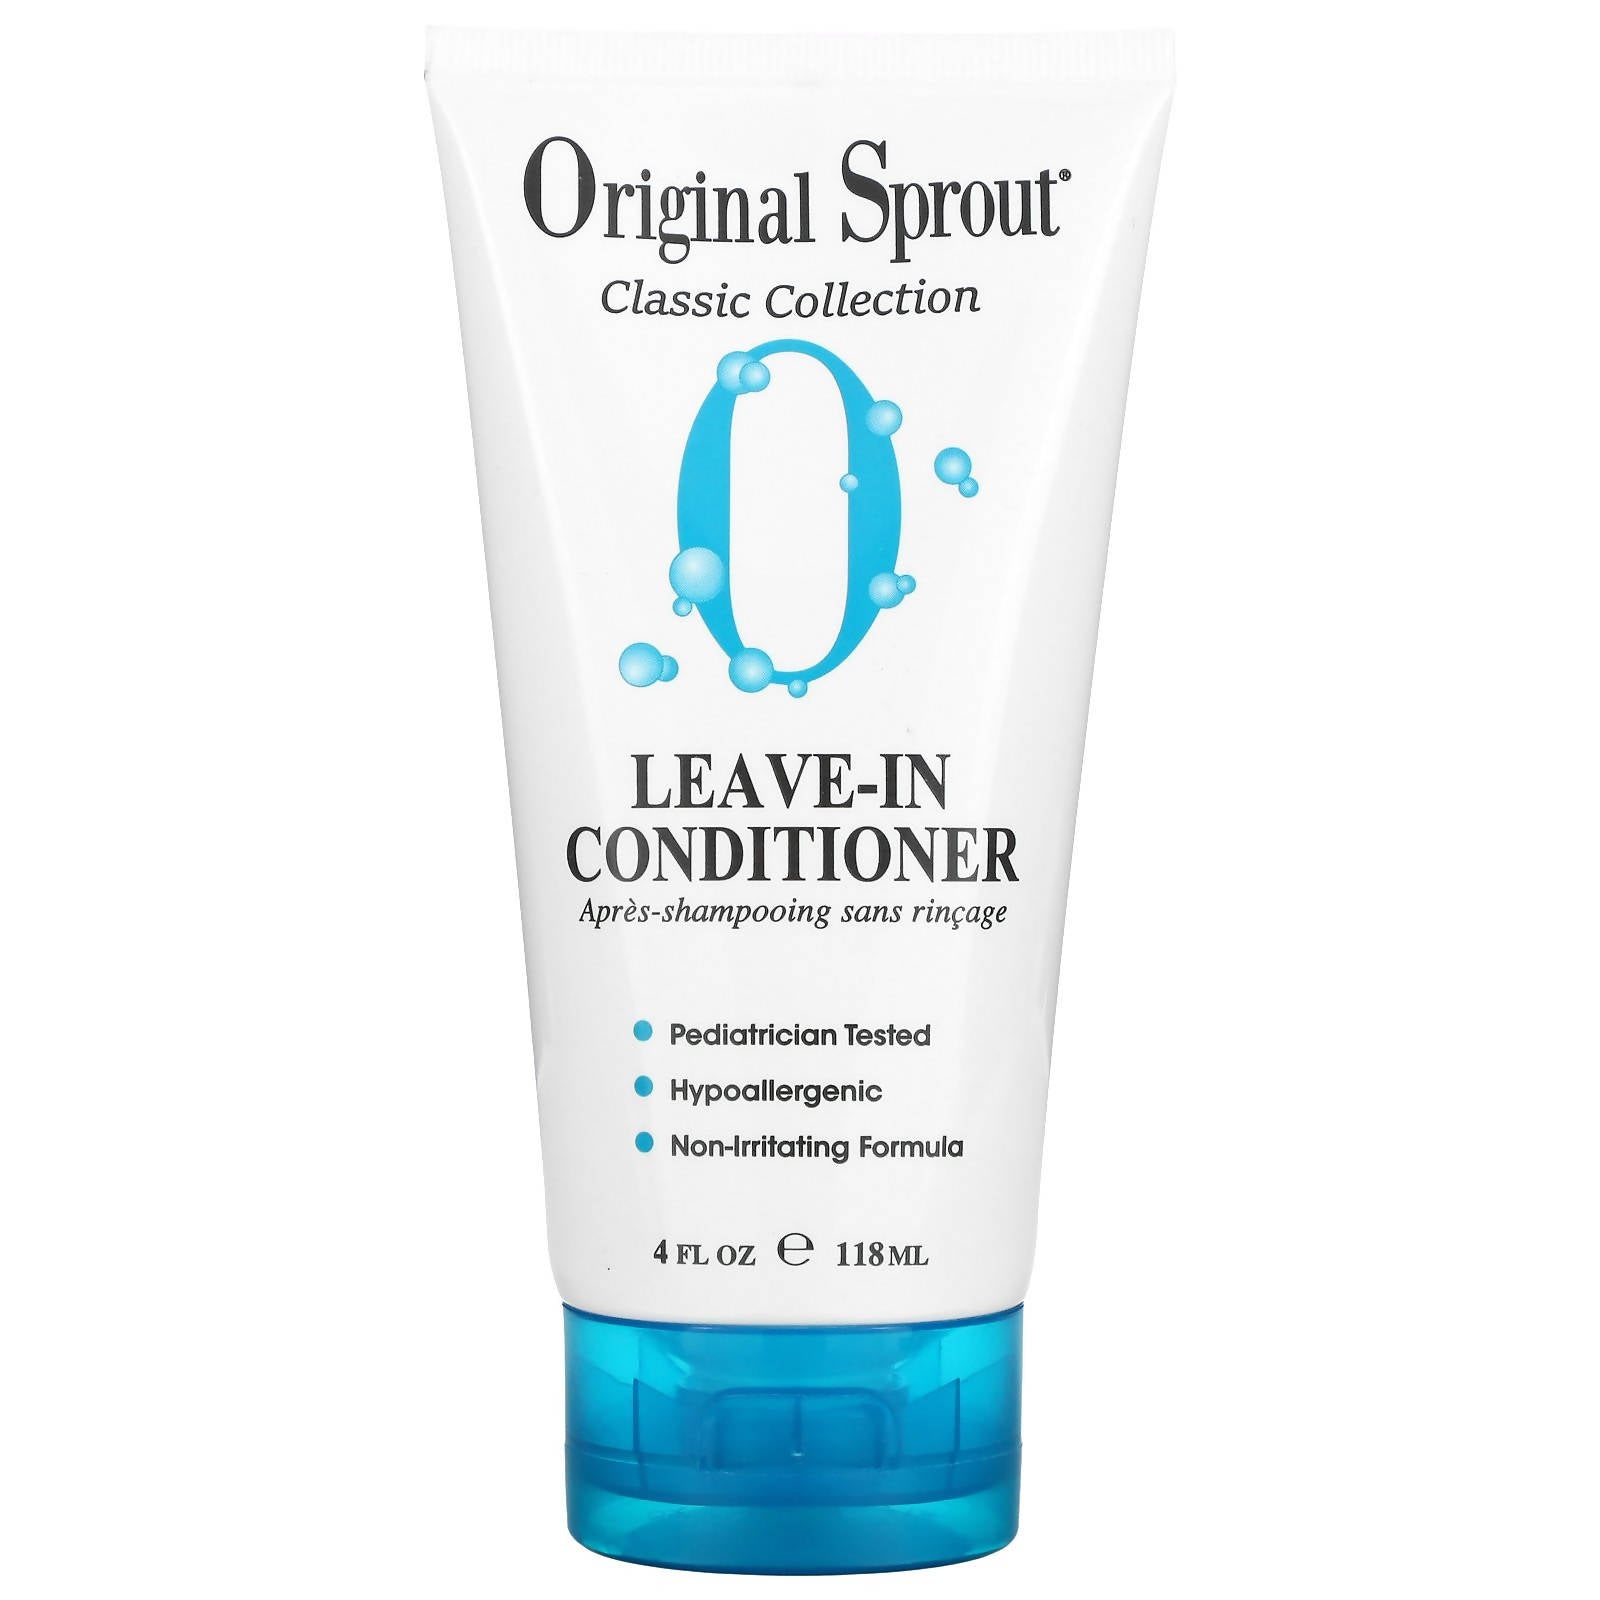 Original Sprout Classic Collection Leave In Conditioner 4oz